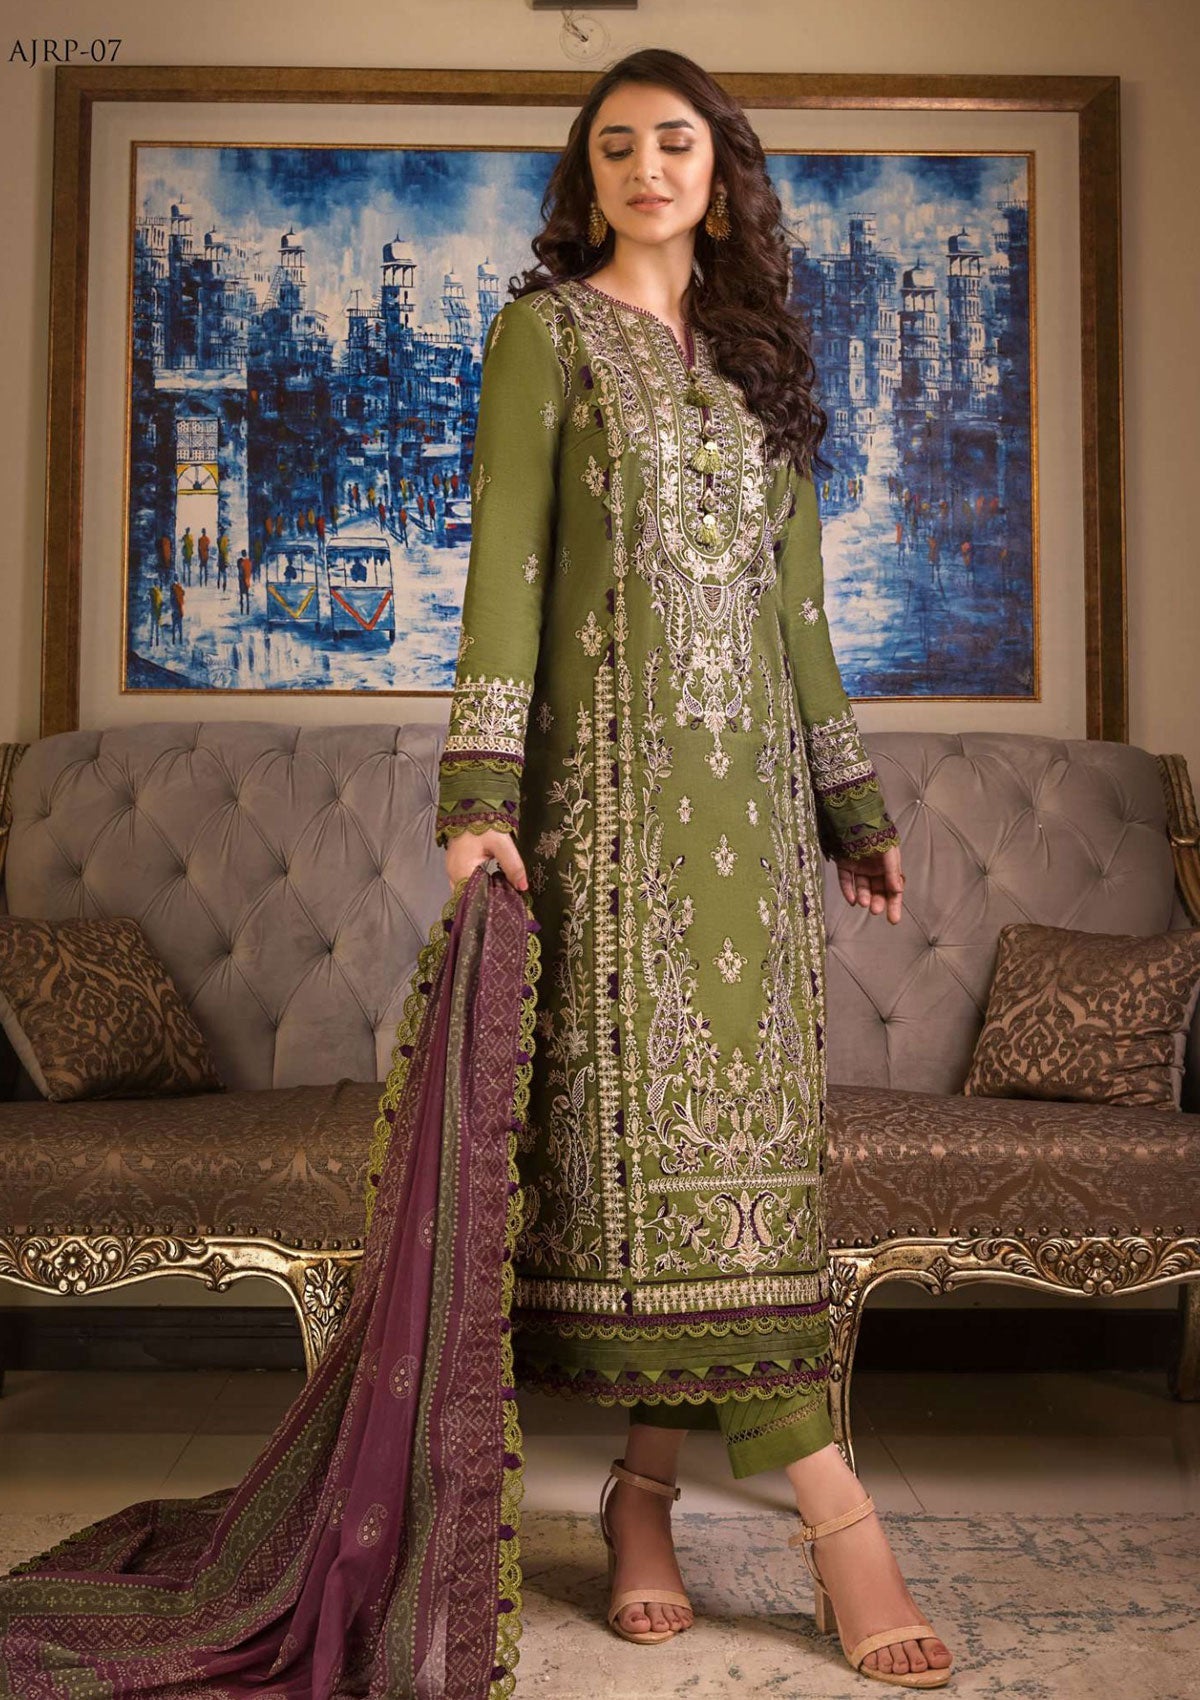 Lawn Collection - Asim Jofa - Rania - AJRP#07 available at Saleem Fabrics Traditions